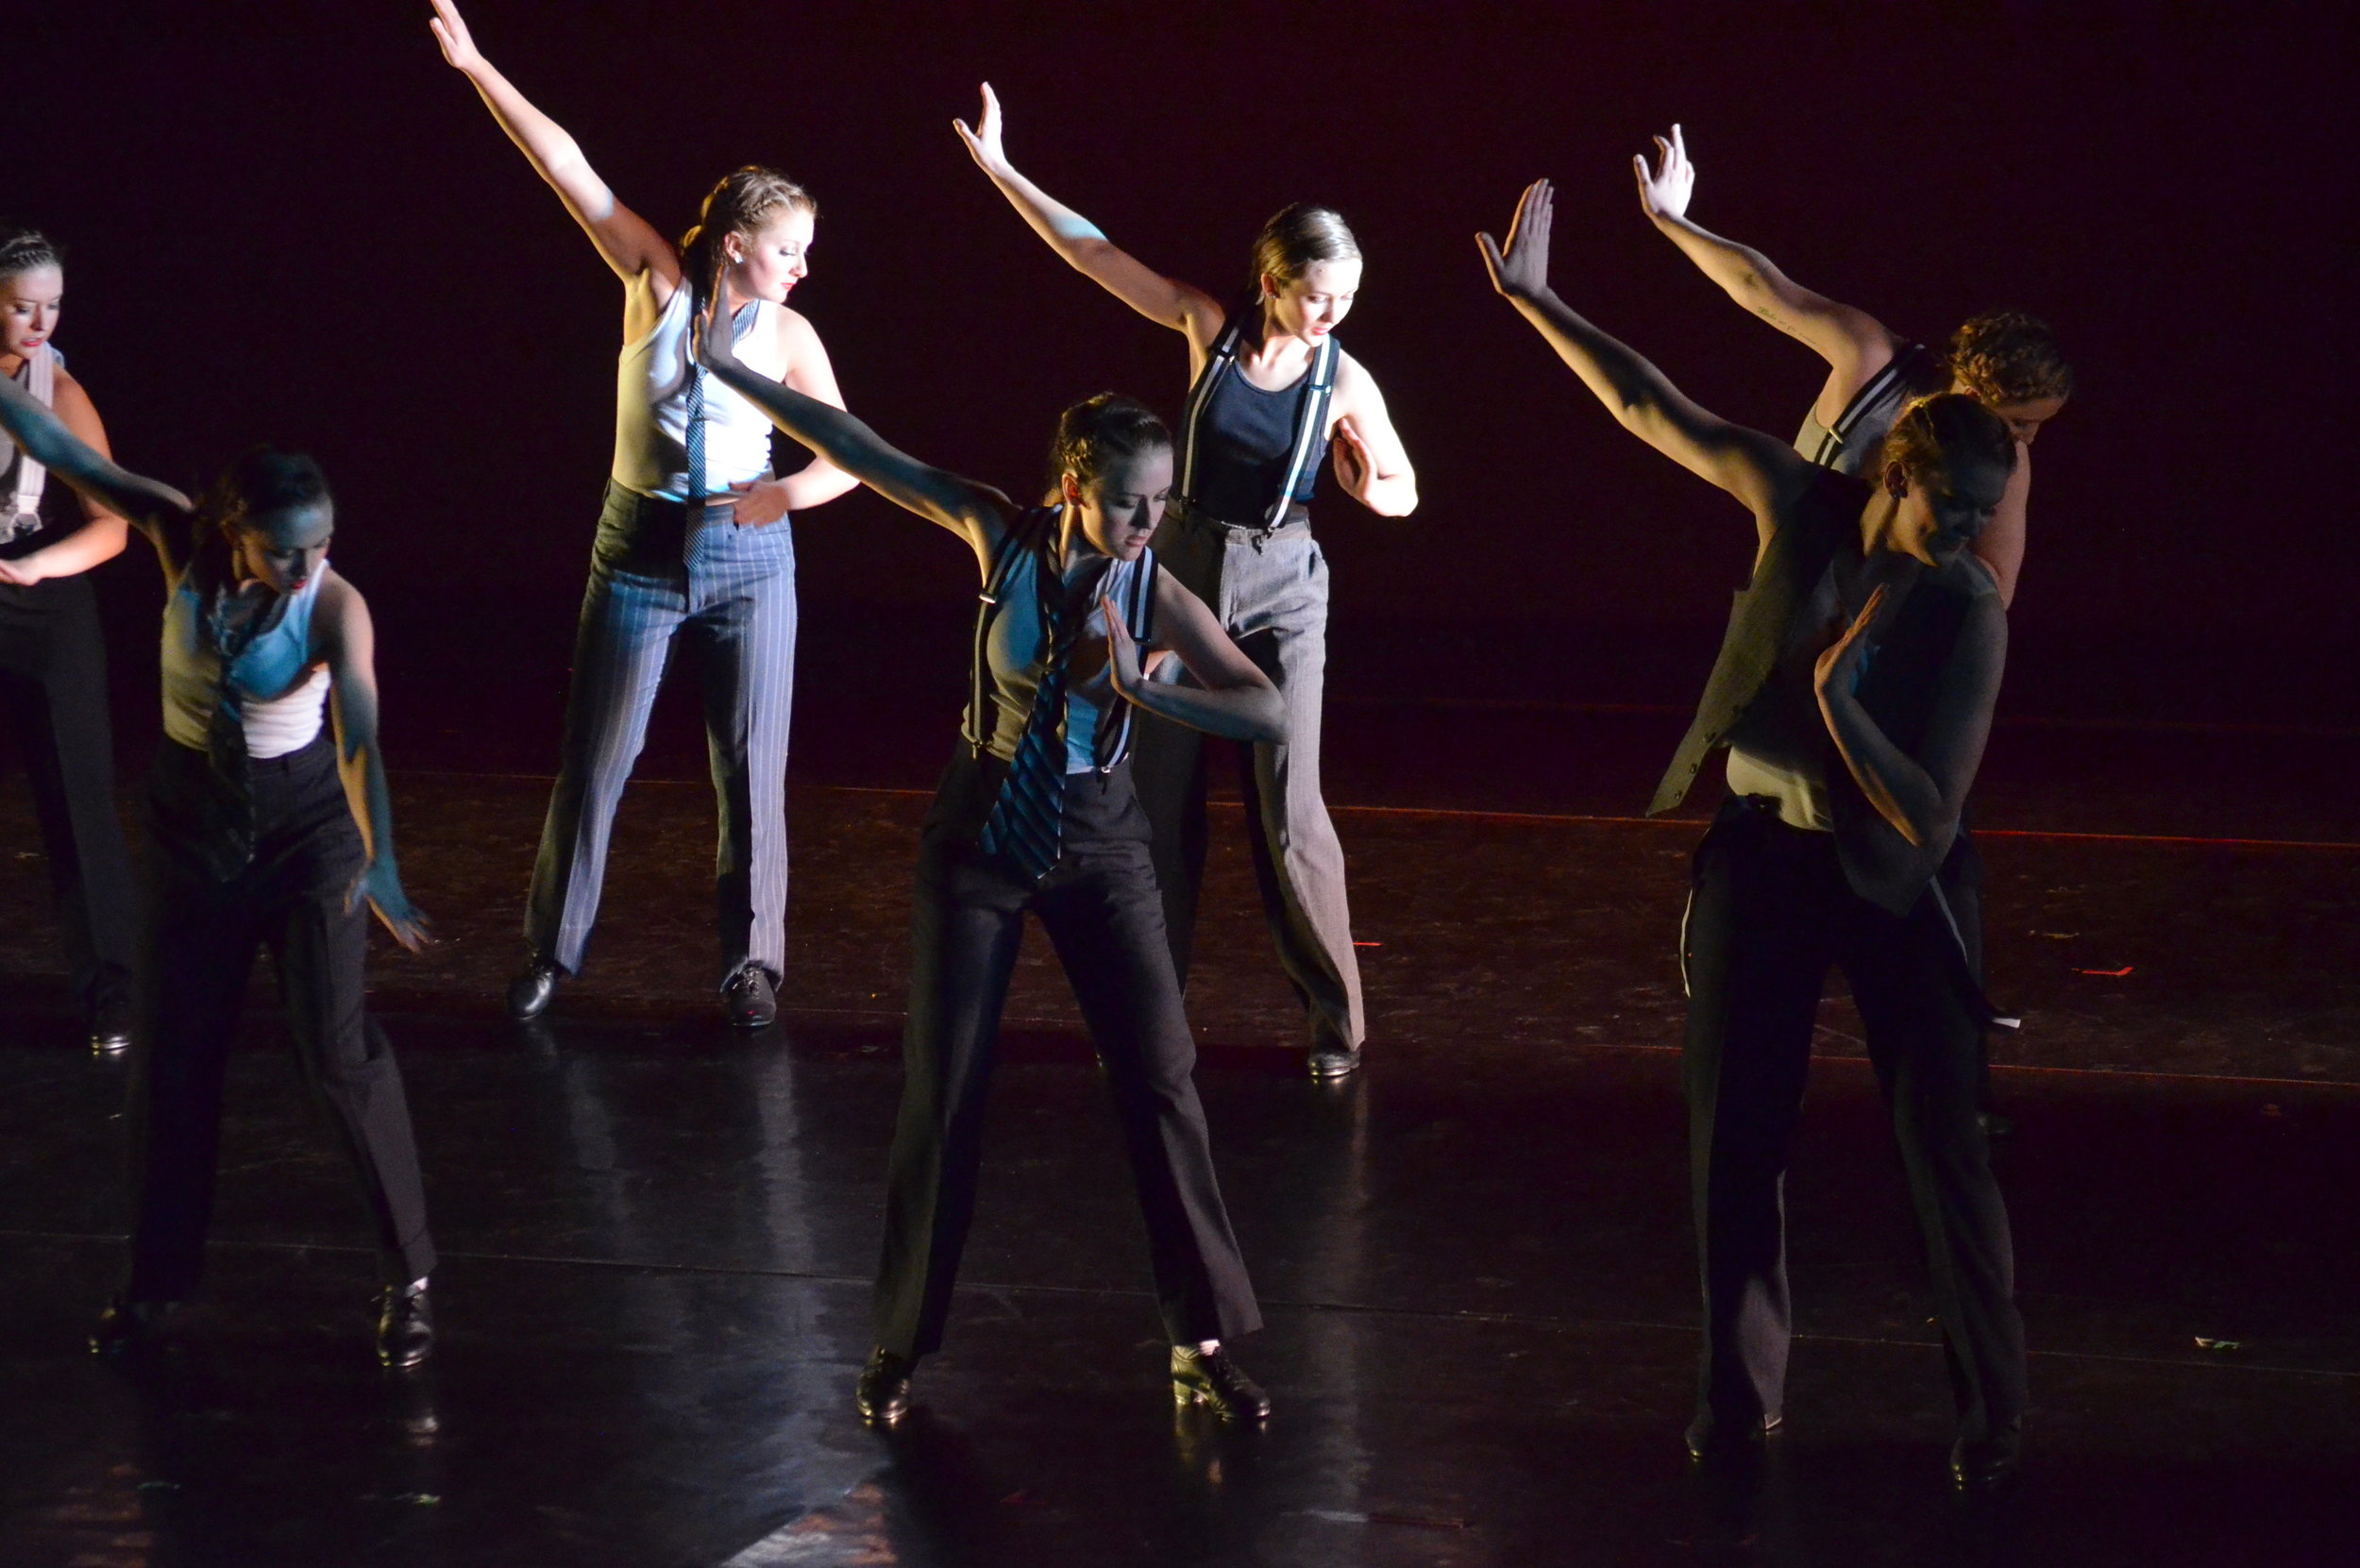   Smooth Criminal   Choreography :  Megan Glynn Zollinger  Photo by George Brown 